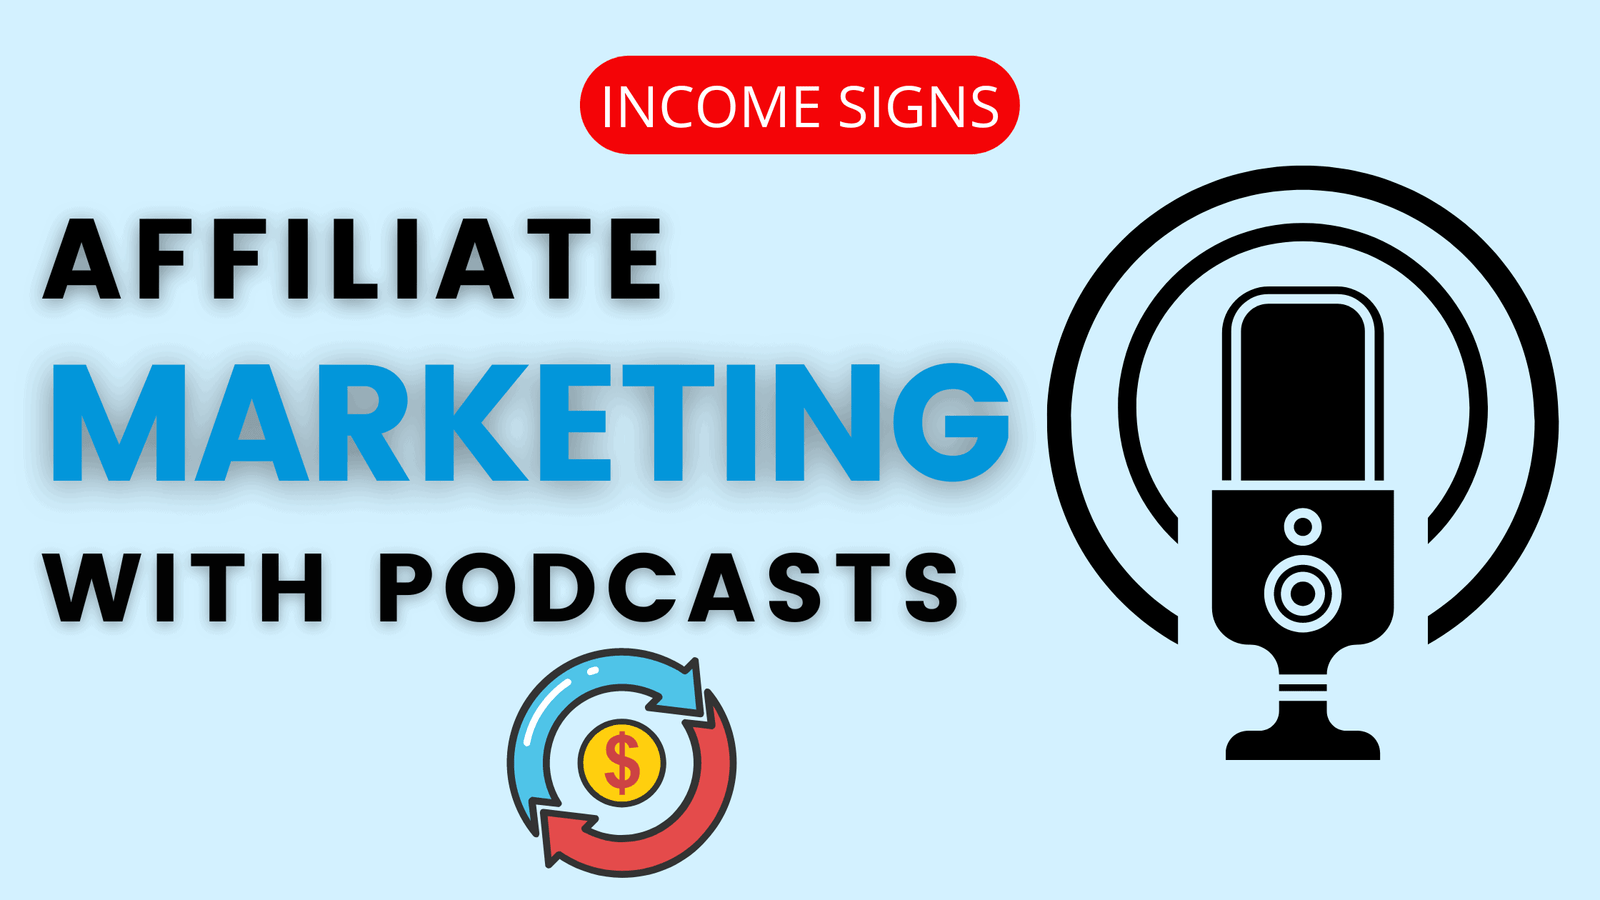 How Can I Promote Affiliate Offers Through Podcasts?